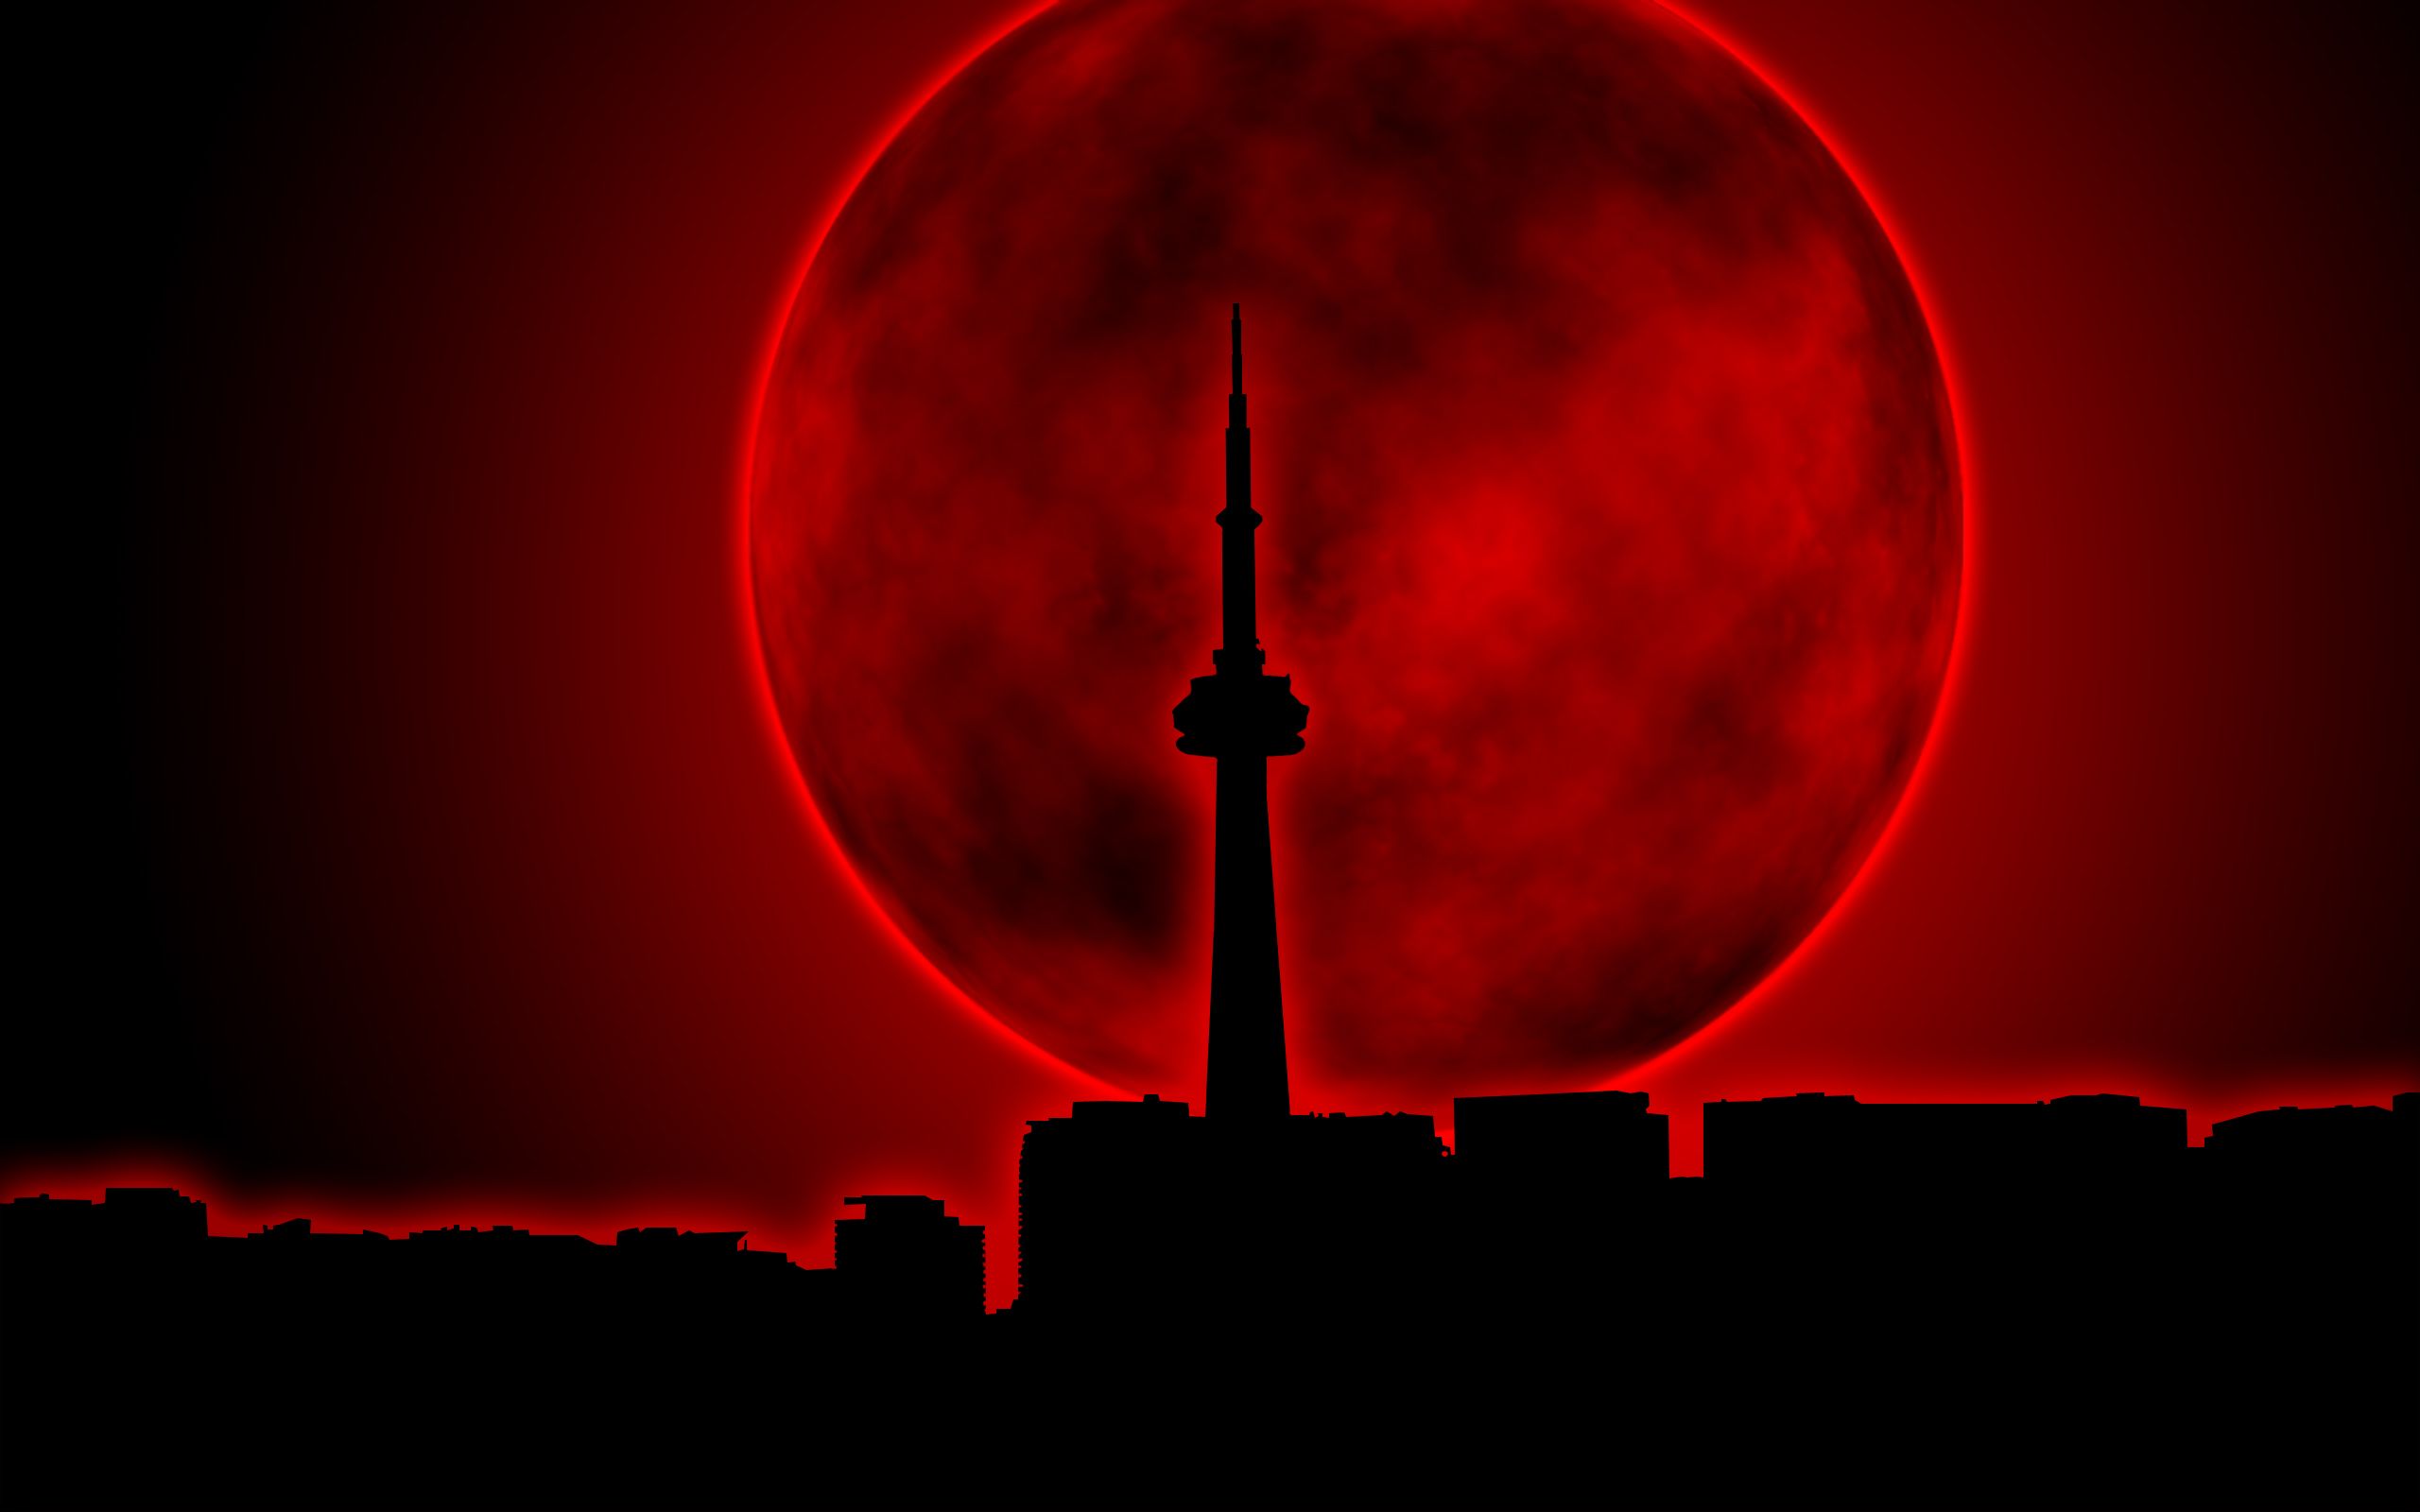 Wallpaper City Moon. Red and Black Background